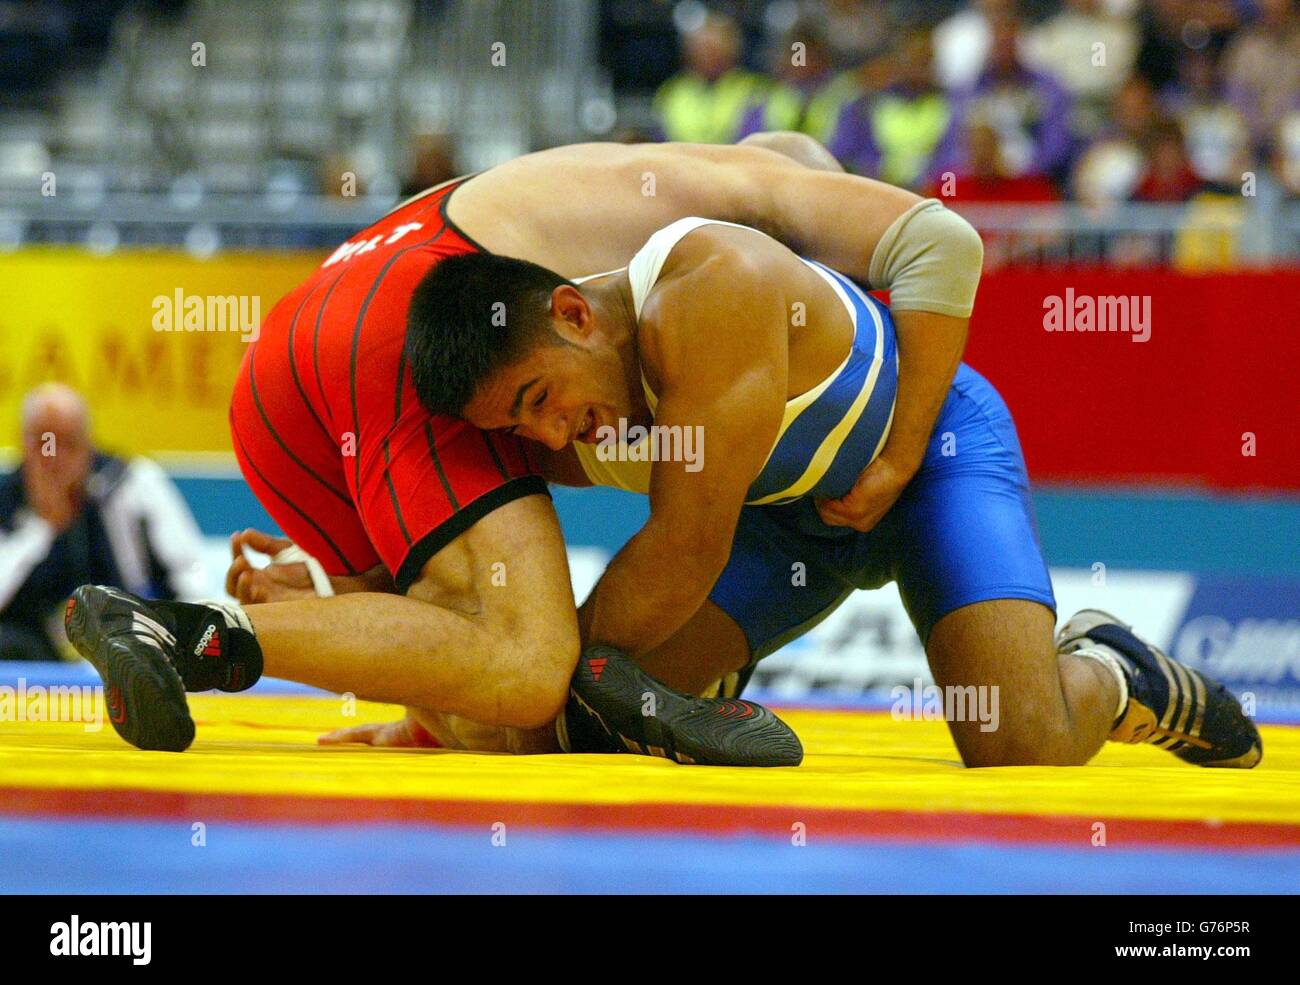 England's Jatinder Singh (Blue) in action against Malta's Abraham Vassallo during the pool section of the mens 84kg wrestling at the Commonwealth Games, G MEX, Manchester. Stock Photo